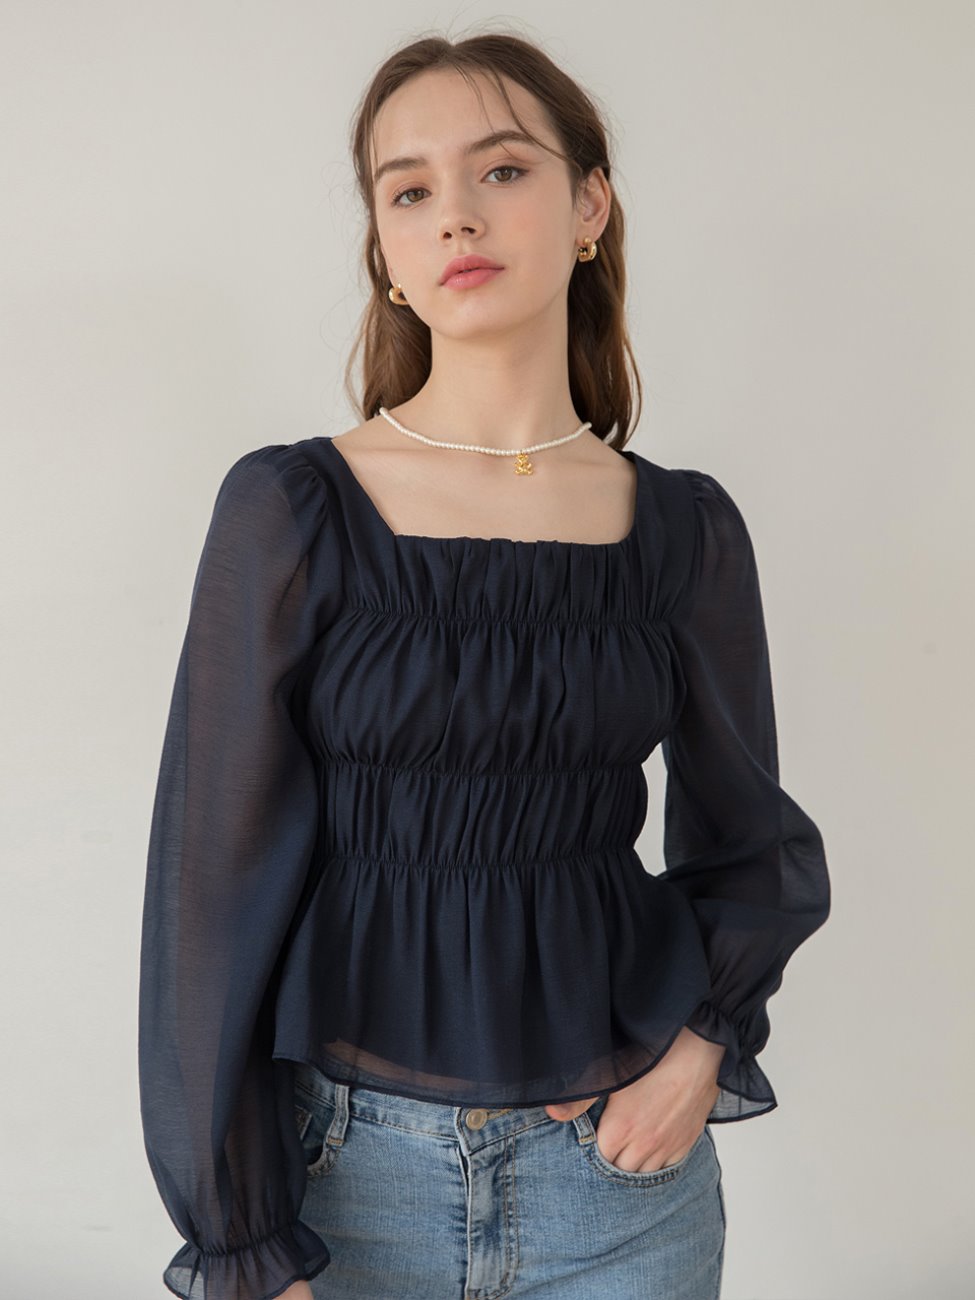 Square Band Blouse Navy